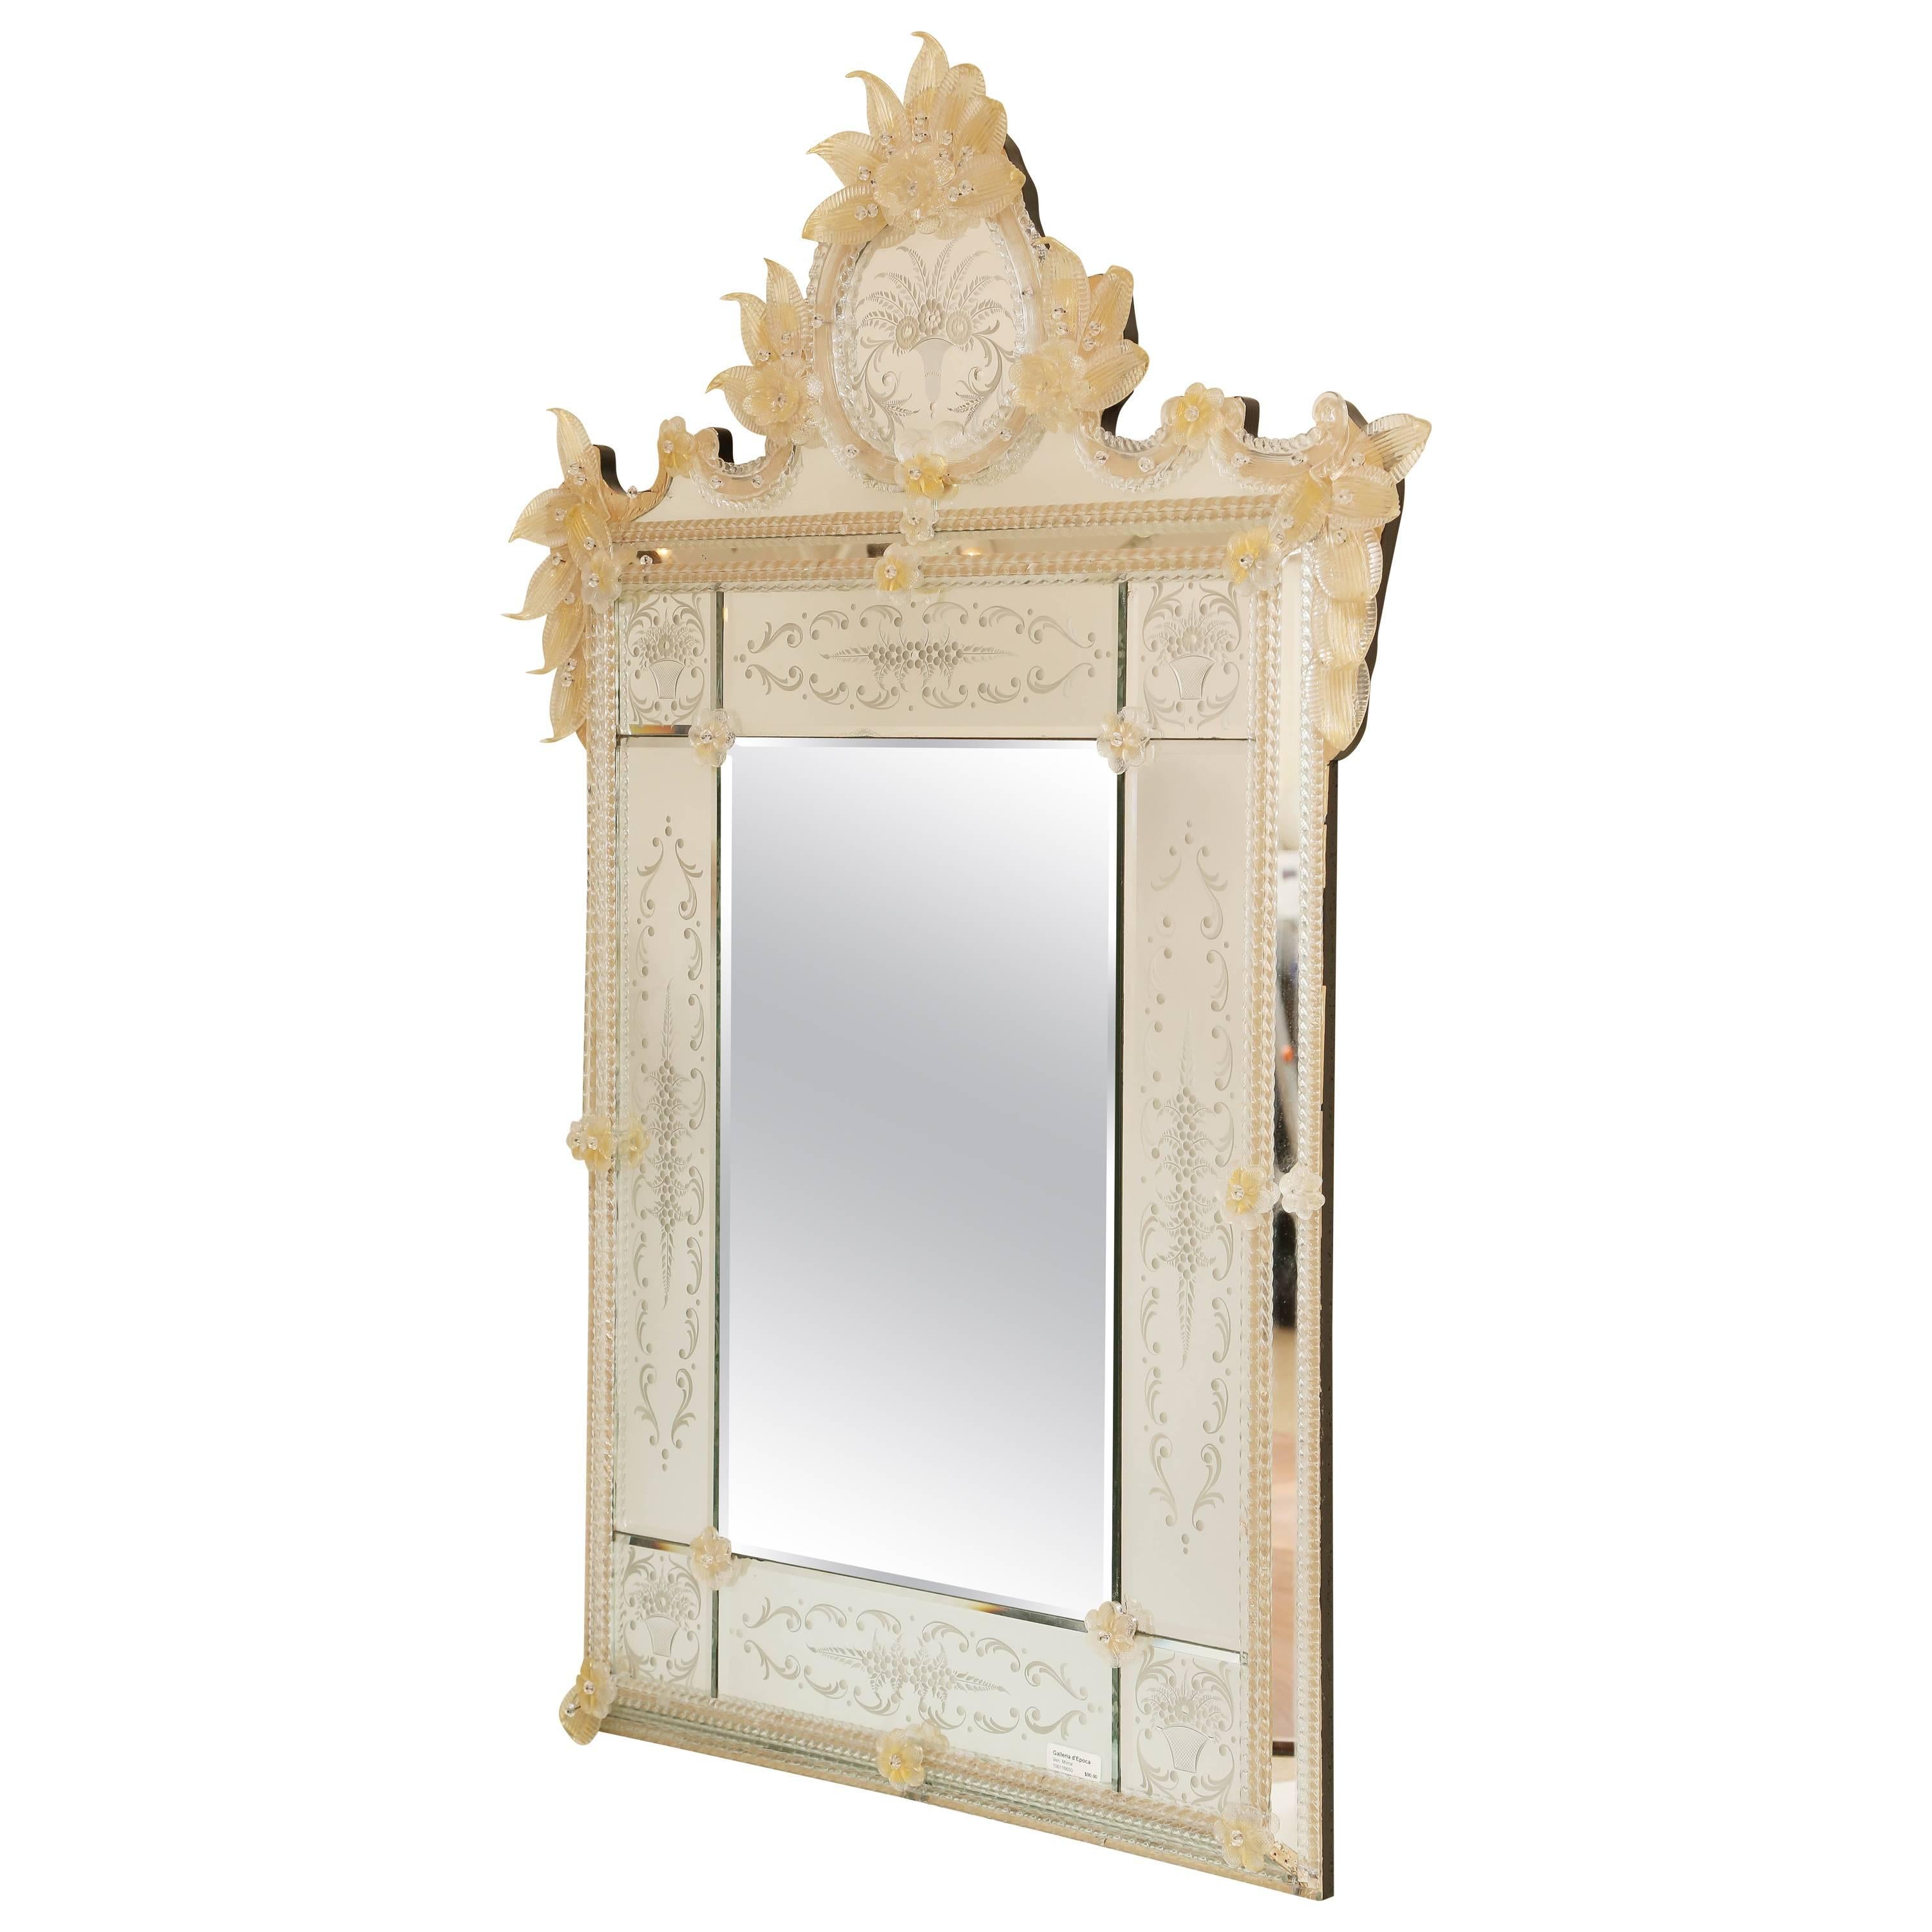 Ornate Etched Venetian Mirror with Bohemian Golden Flowers